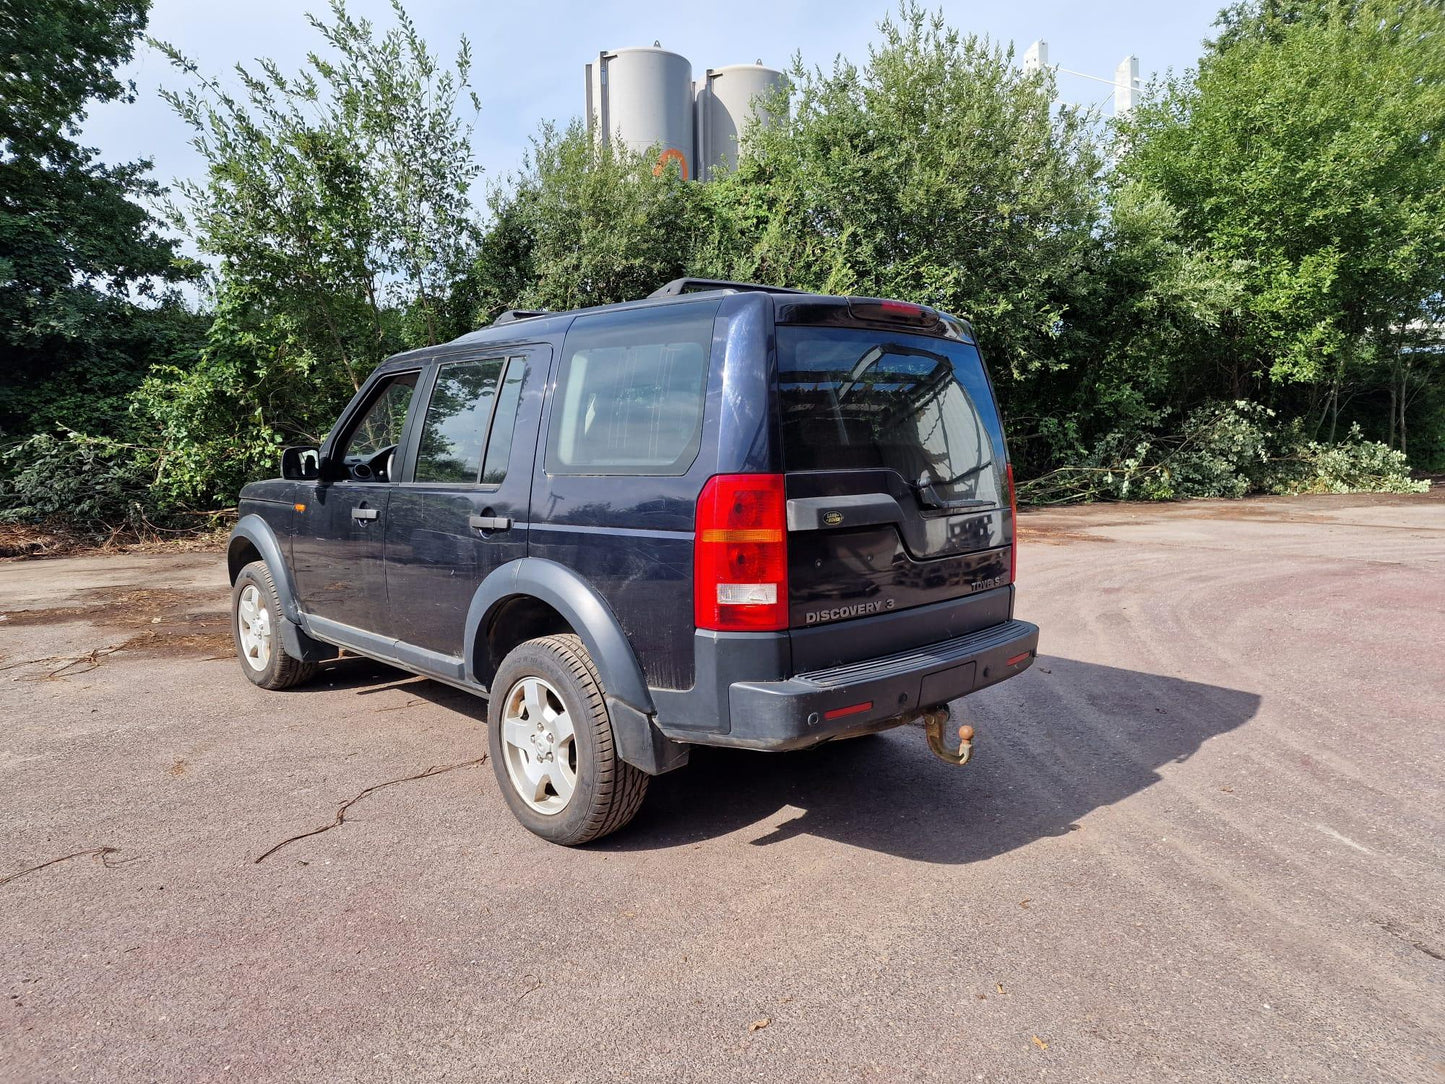 Land Rover Discovery TDV6 SE 2005  - Plaats een bod! - Veilingcoach.be